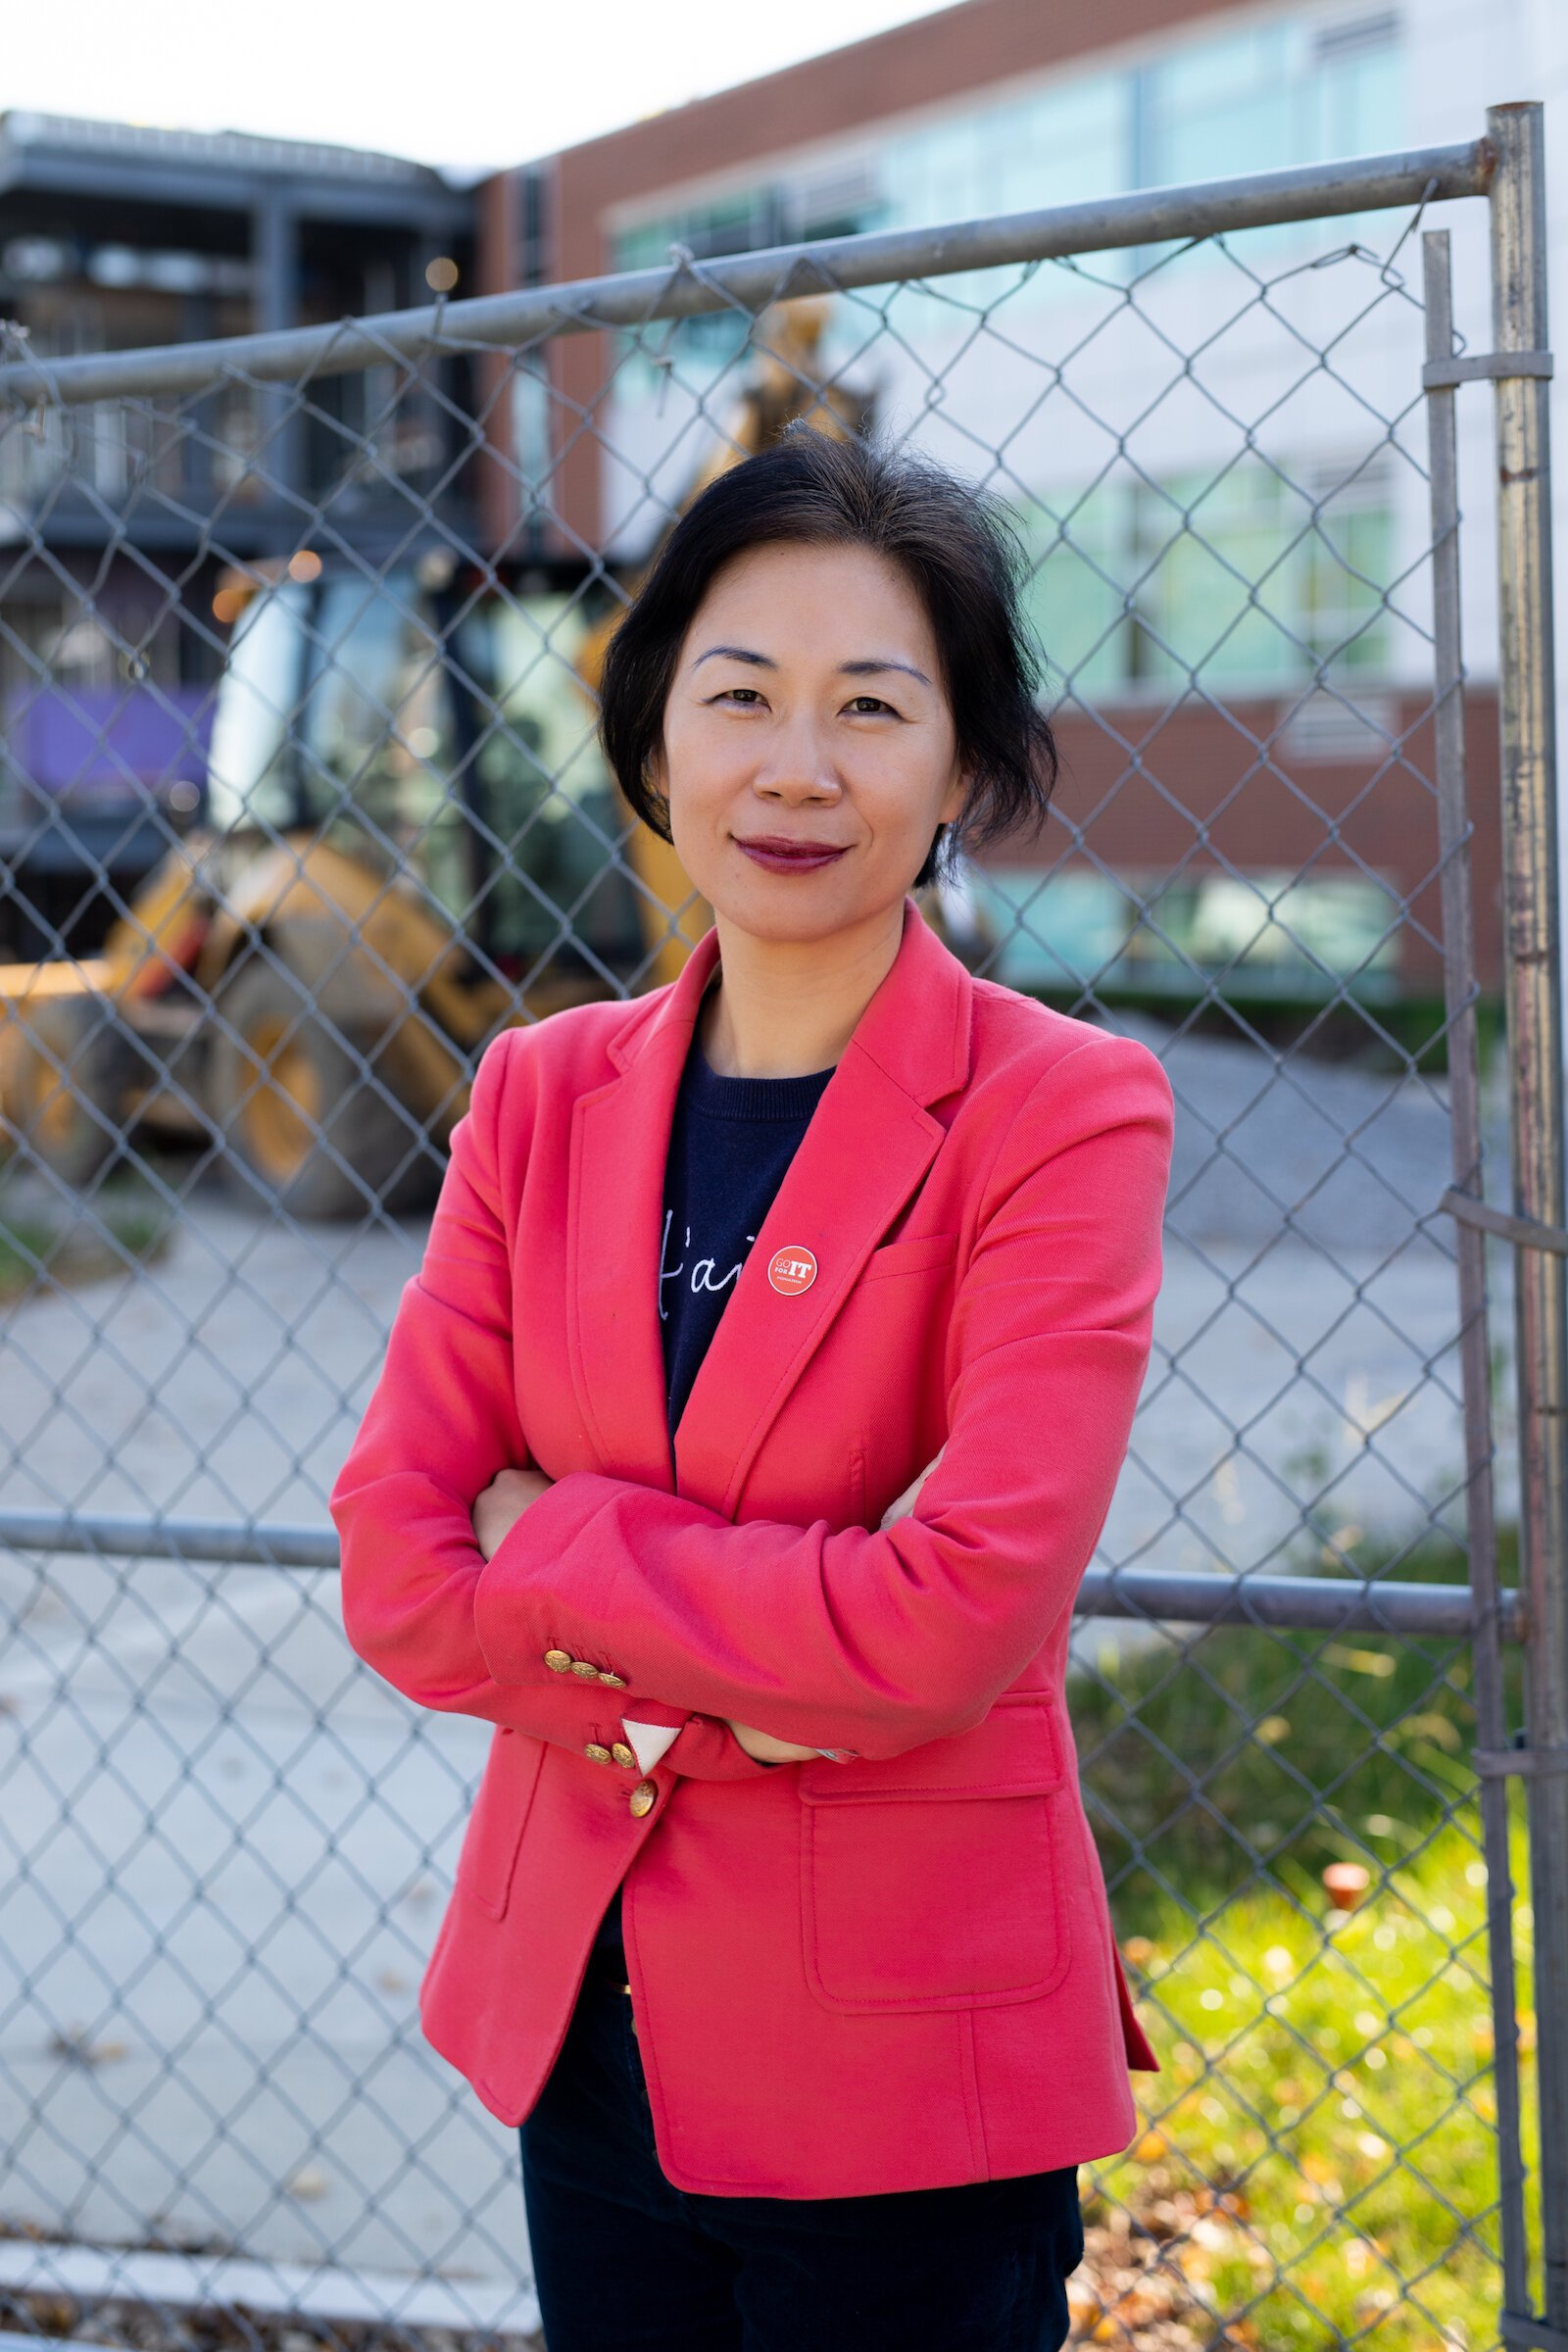 Dr. Ying Shang stands in front of the Zollner Engineering Center at Indiana Tech, which is under construction to double its size.